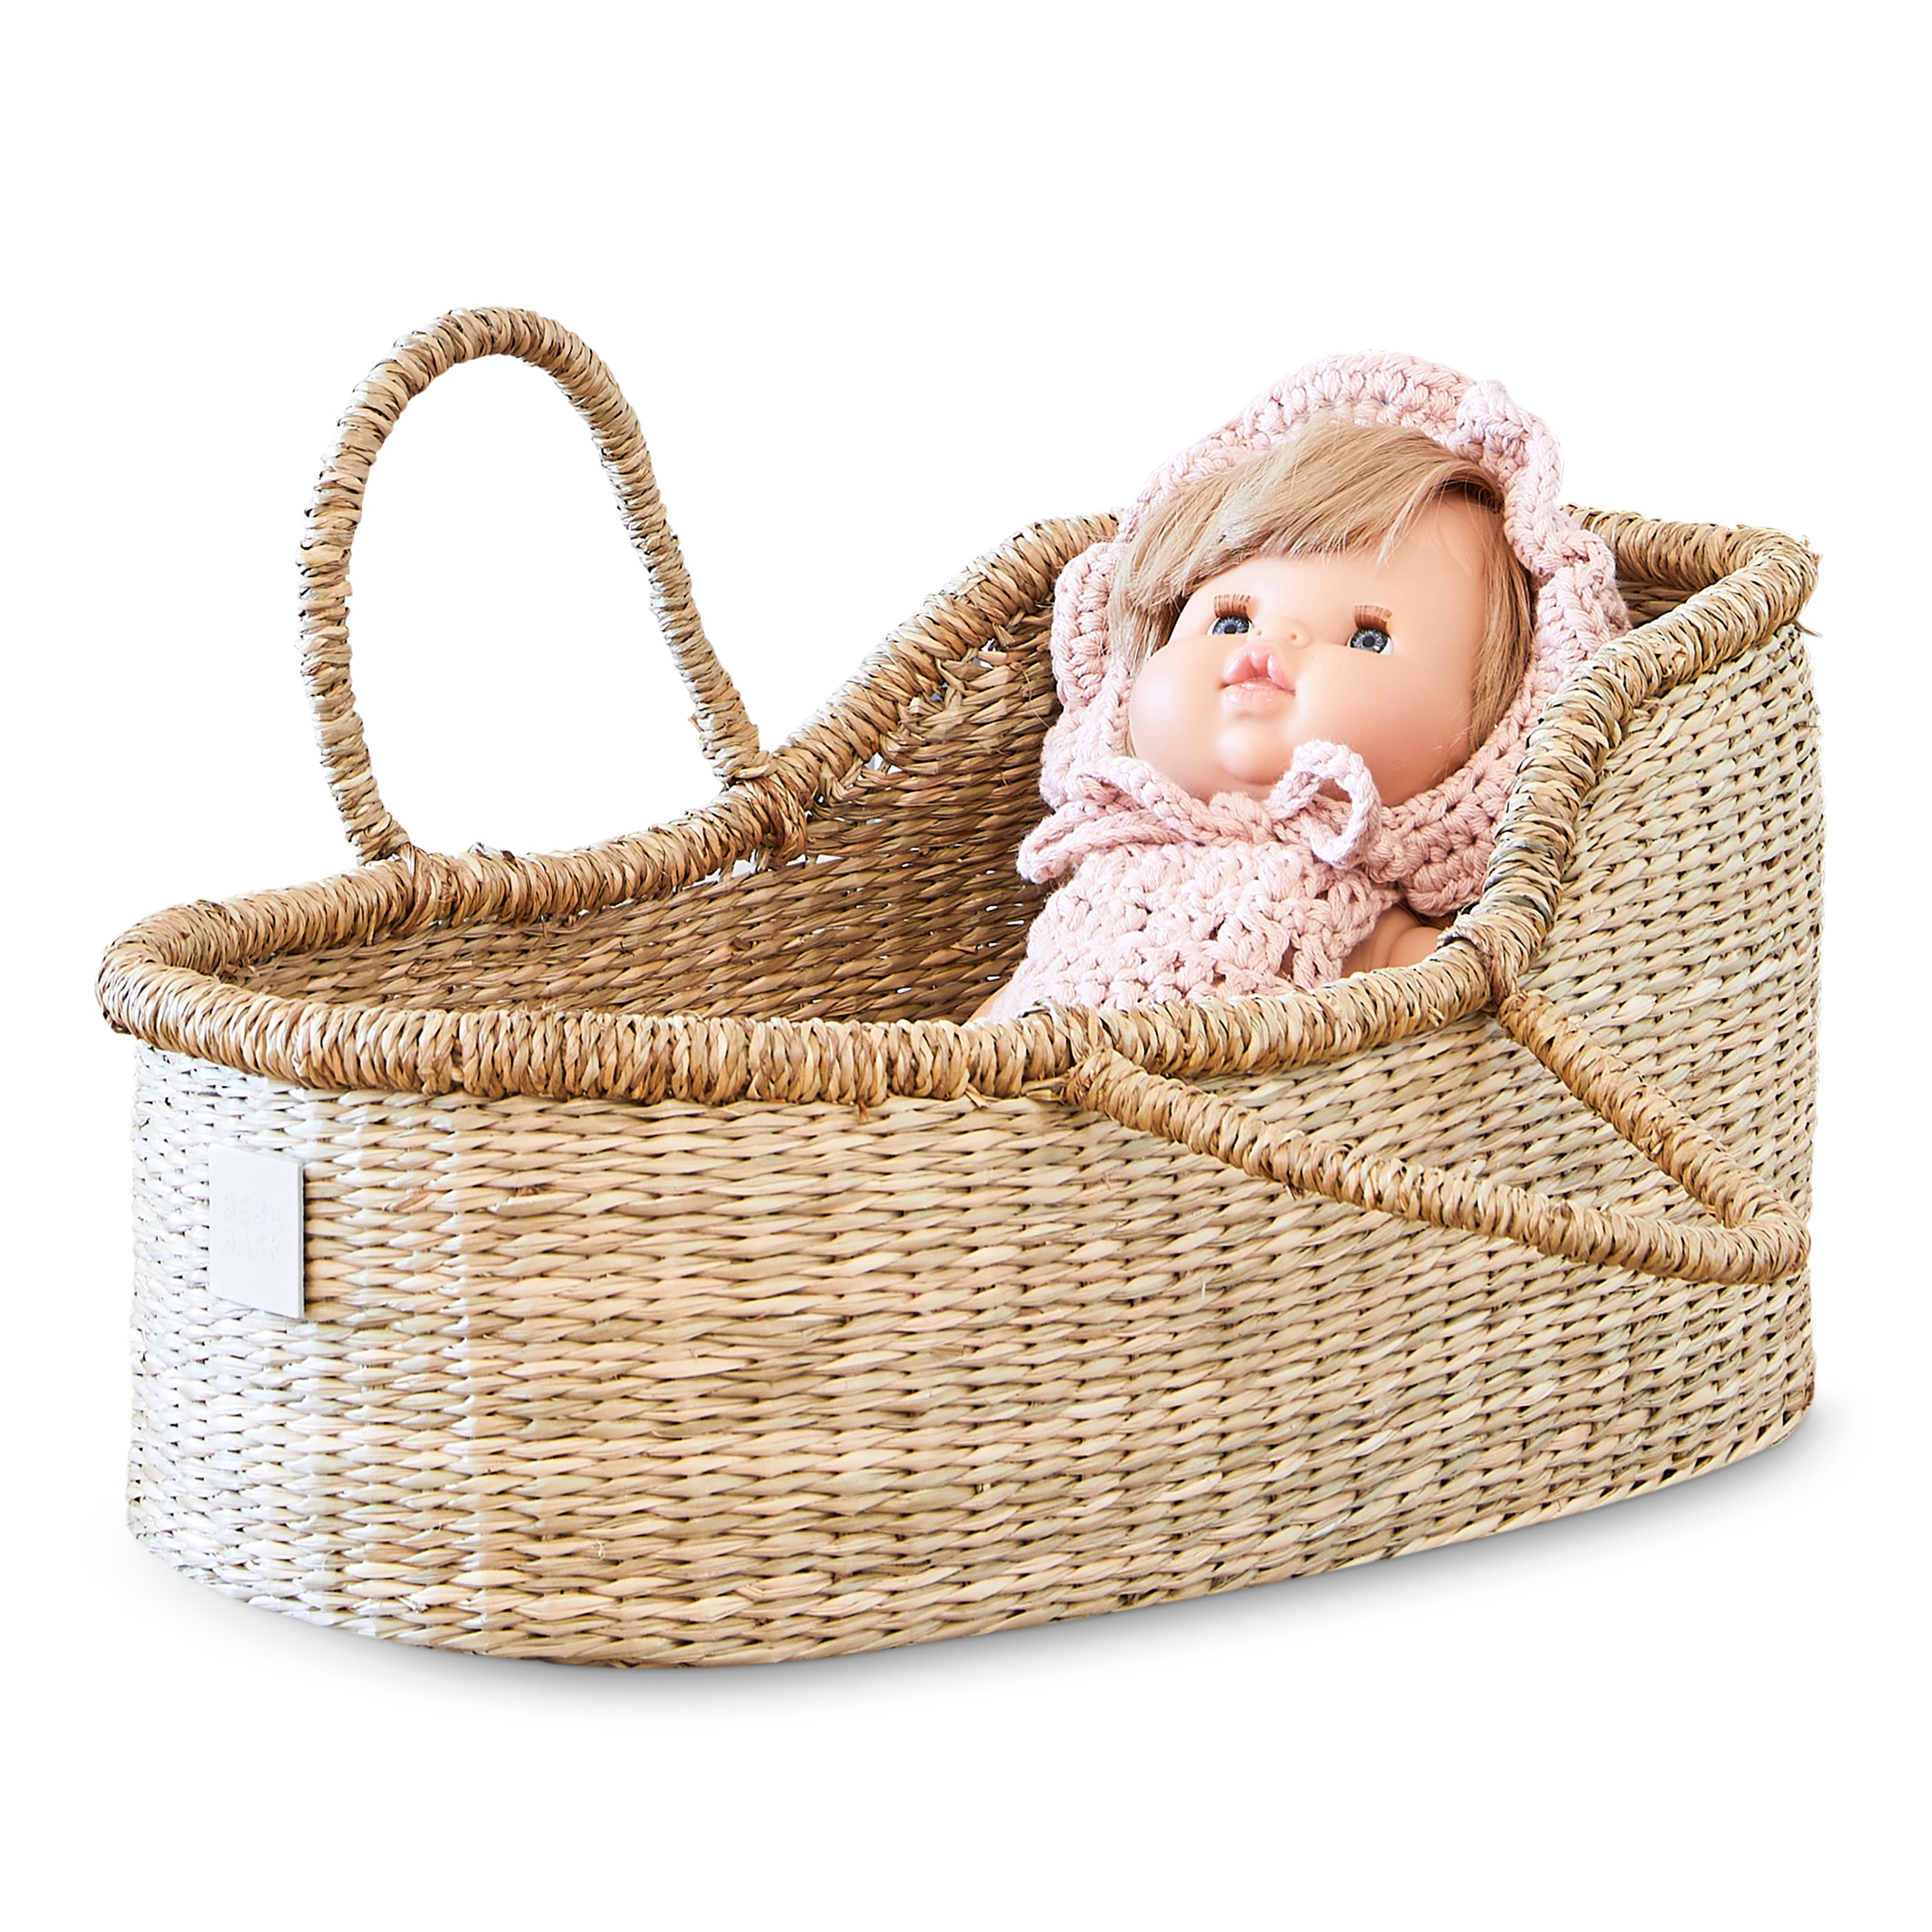 Bebe Bask Premium Baby Doll Bassinet. Handcrafted Baby Doll Moses Basket, Perfect Baby Doll Basket or Baby Doll Basket Carrier.